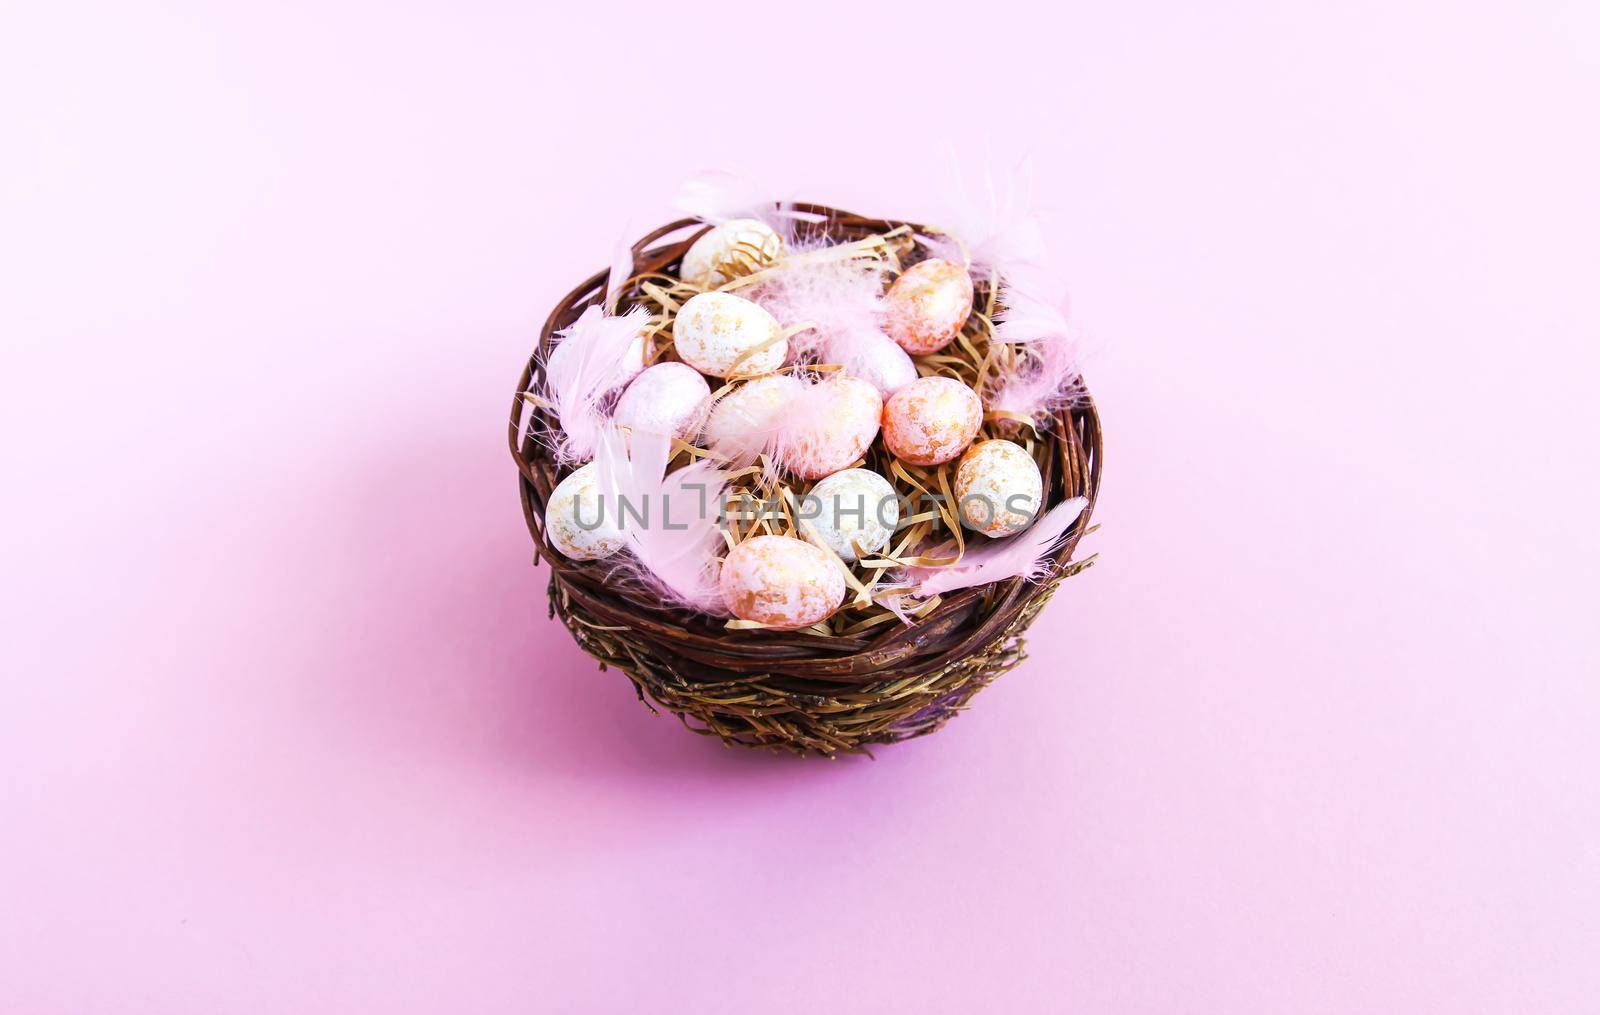 Easter composition with traditional decor. Small decorative colorful eggs and soft feathers in a wicker basket on pink light background.